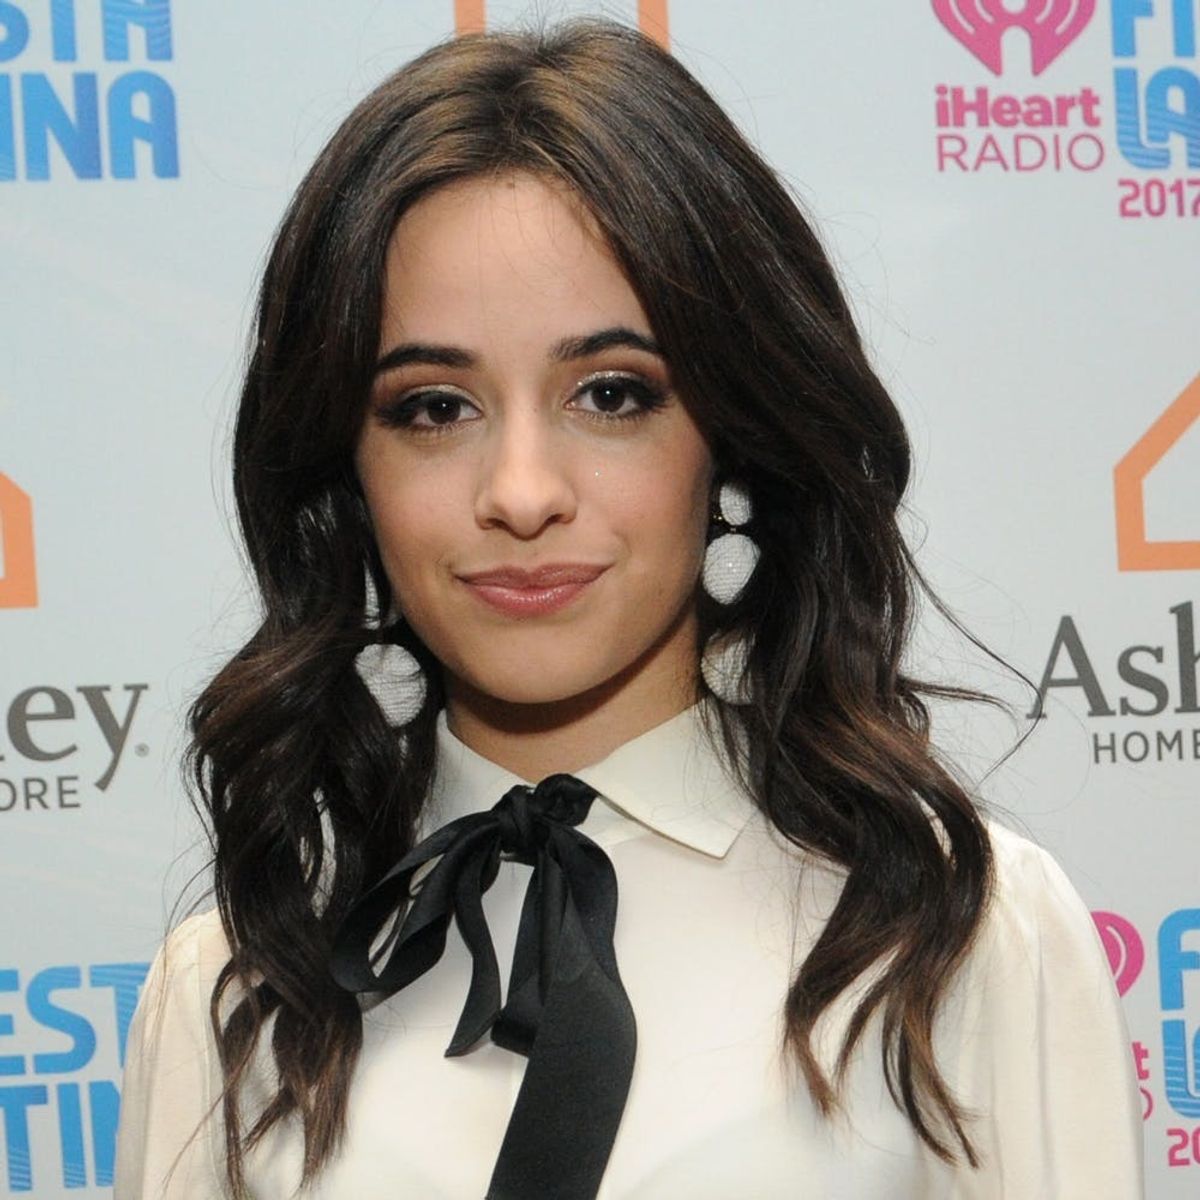 Camila Cabello Thought She Was Going to Die the Night Before Her Album Release